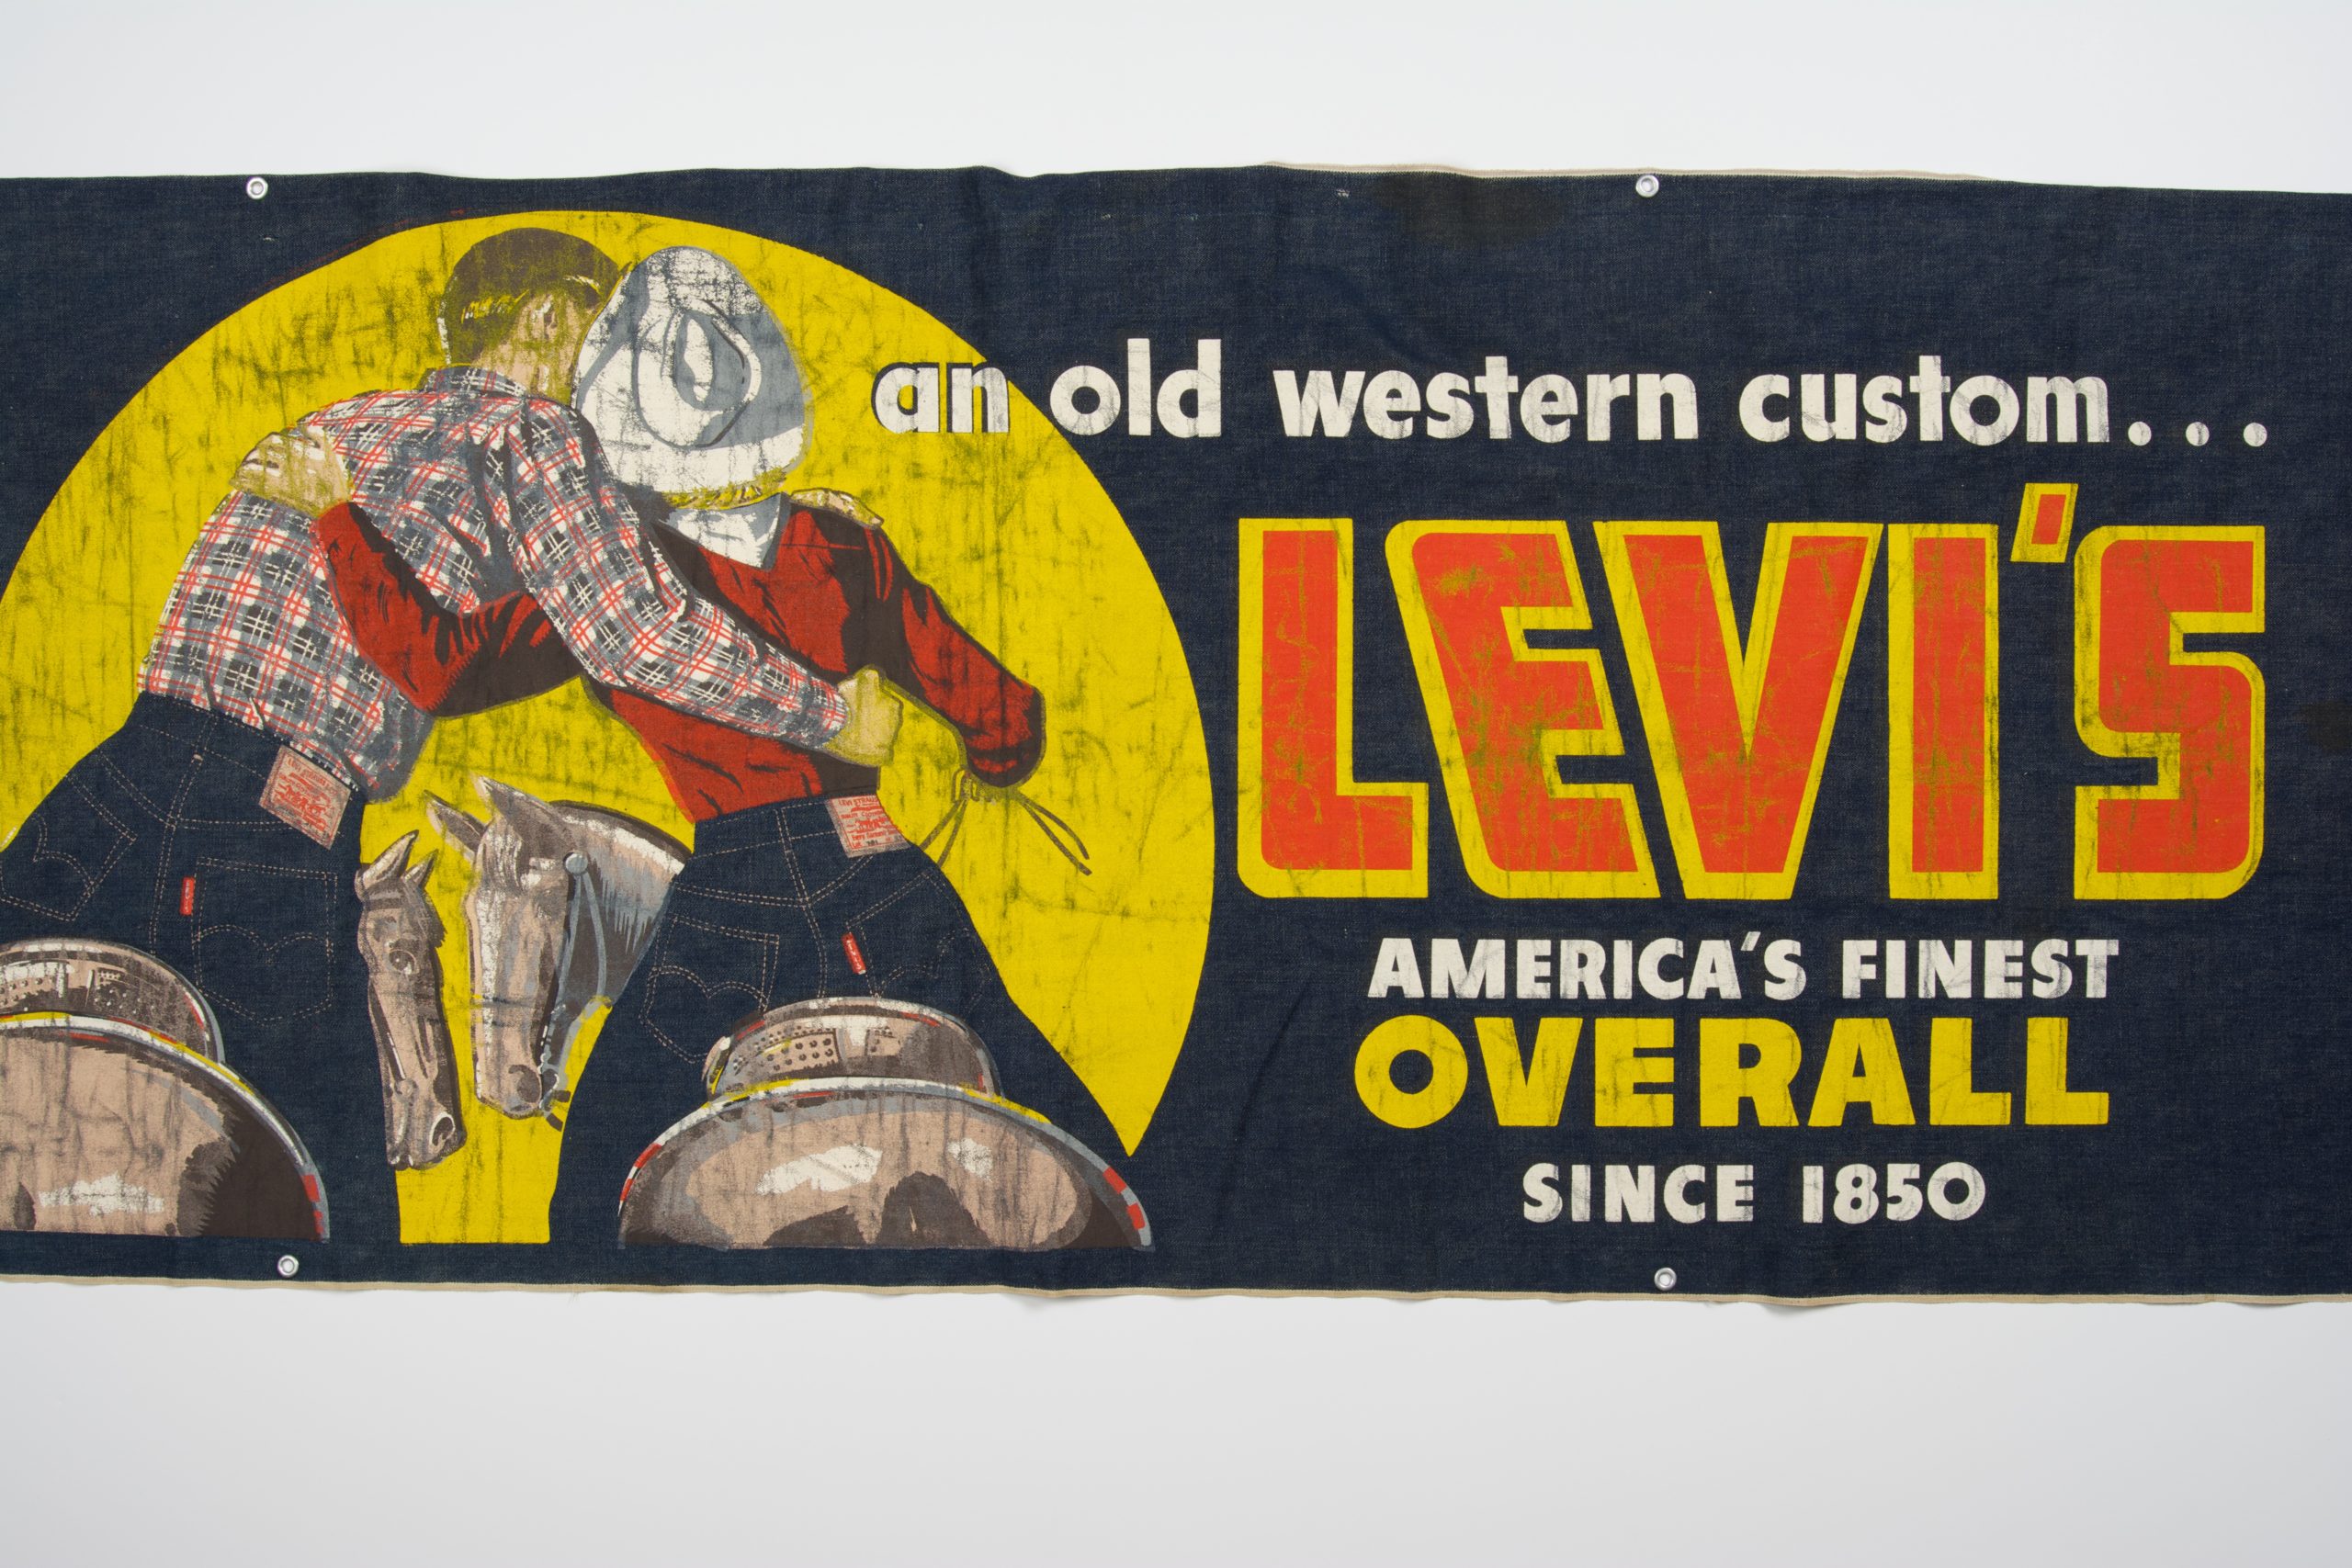 Old Levi's advertisement says, "an old western custom...Levi's America's Finest Overall since 1850"